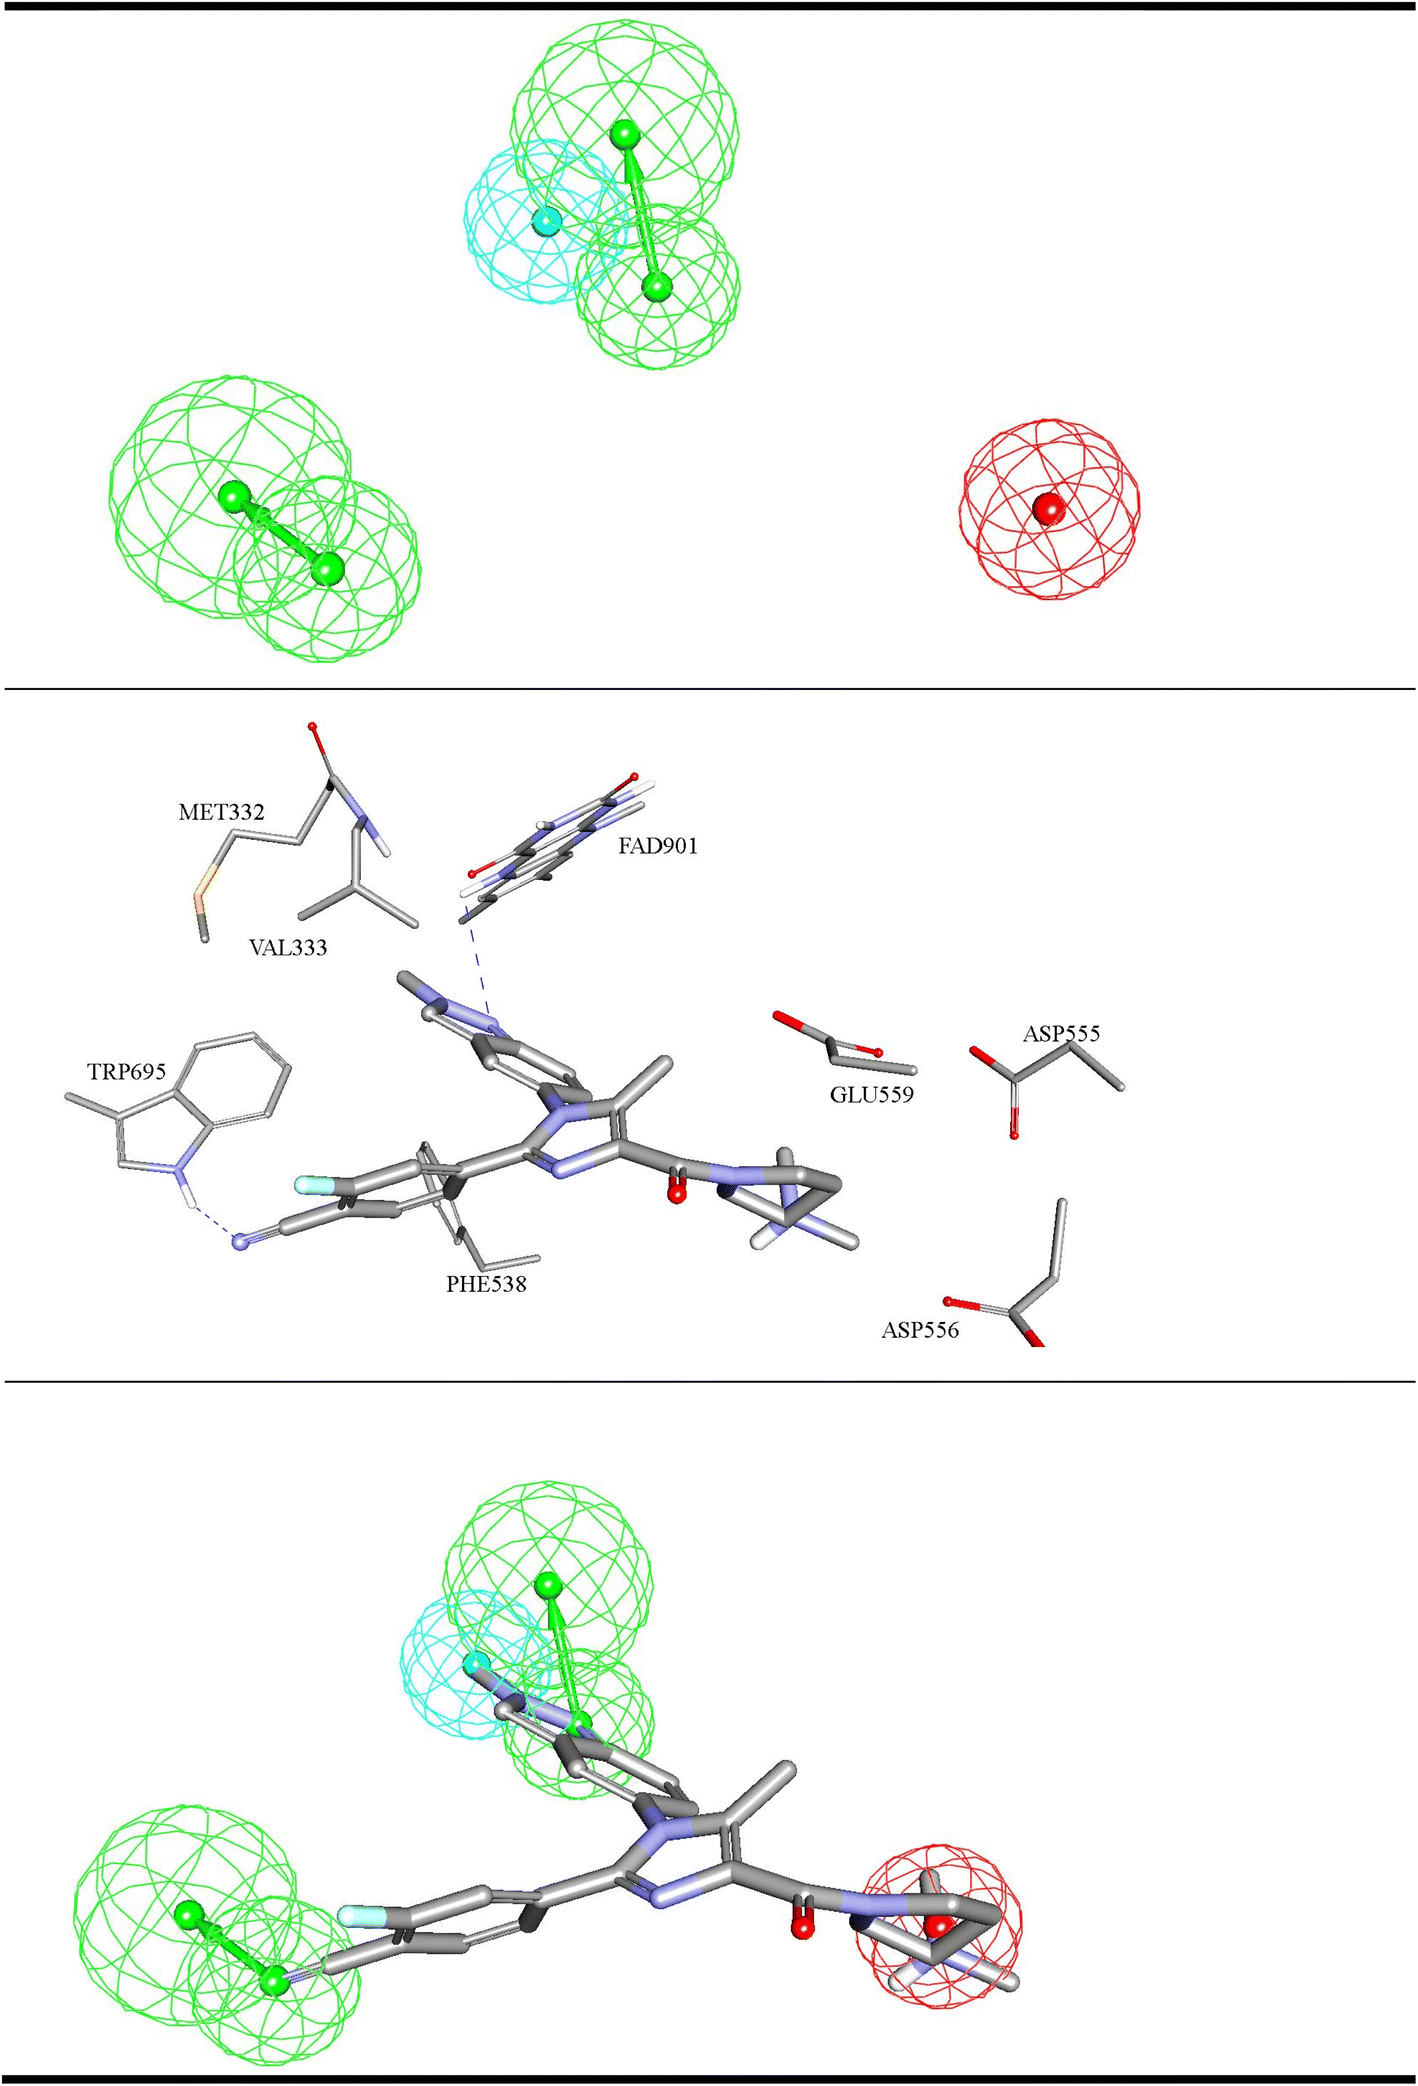 Discovery of new potent lysine specific histone demythelase-1 inhibitors  (LSD-1) using structure based and ligand based molecular modelling and  machin  - RSC Advances (RSC Publishing) DOI:10.1039/D2RA05102H